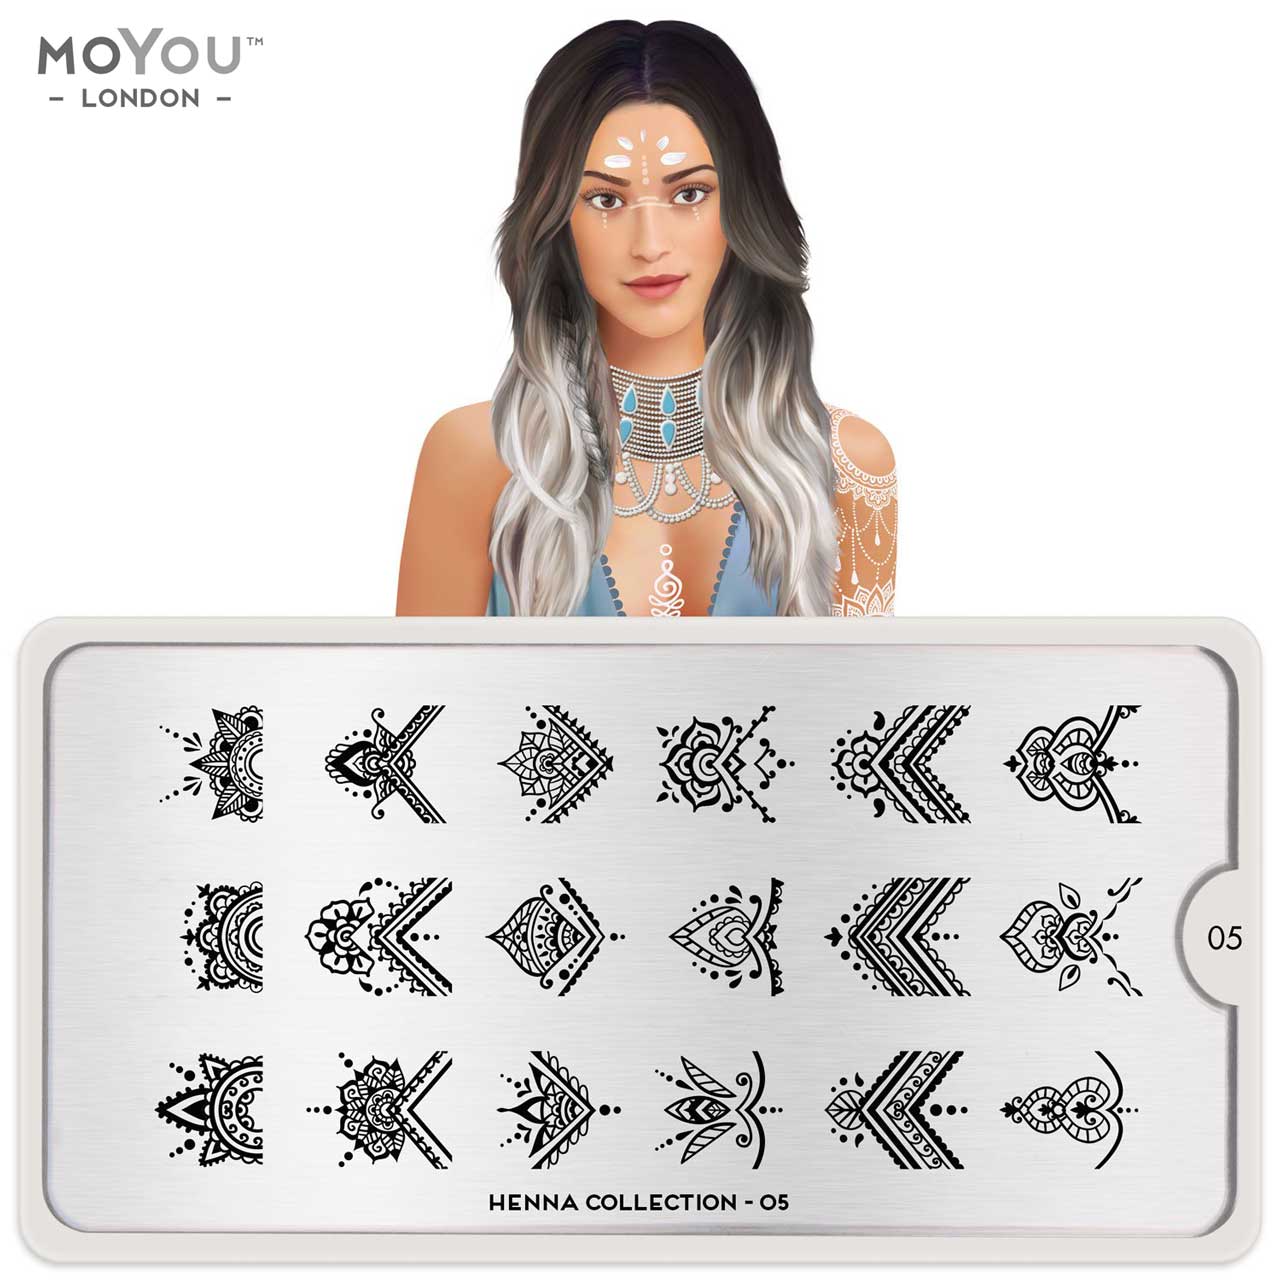 Plaque Stamping Henna 05 - MoYou London